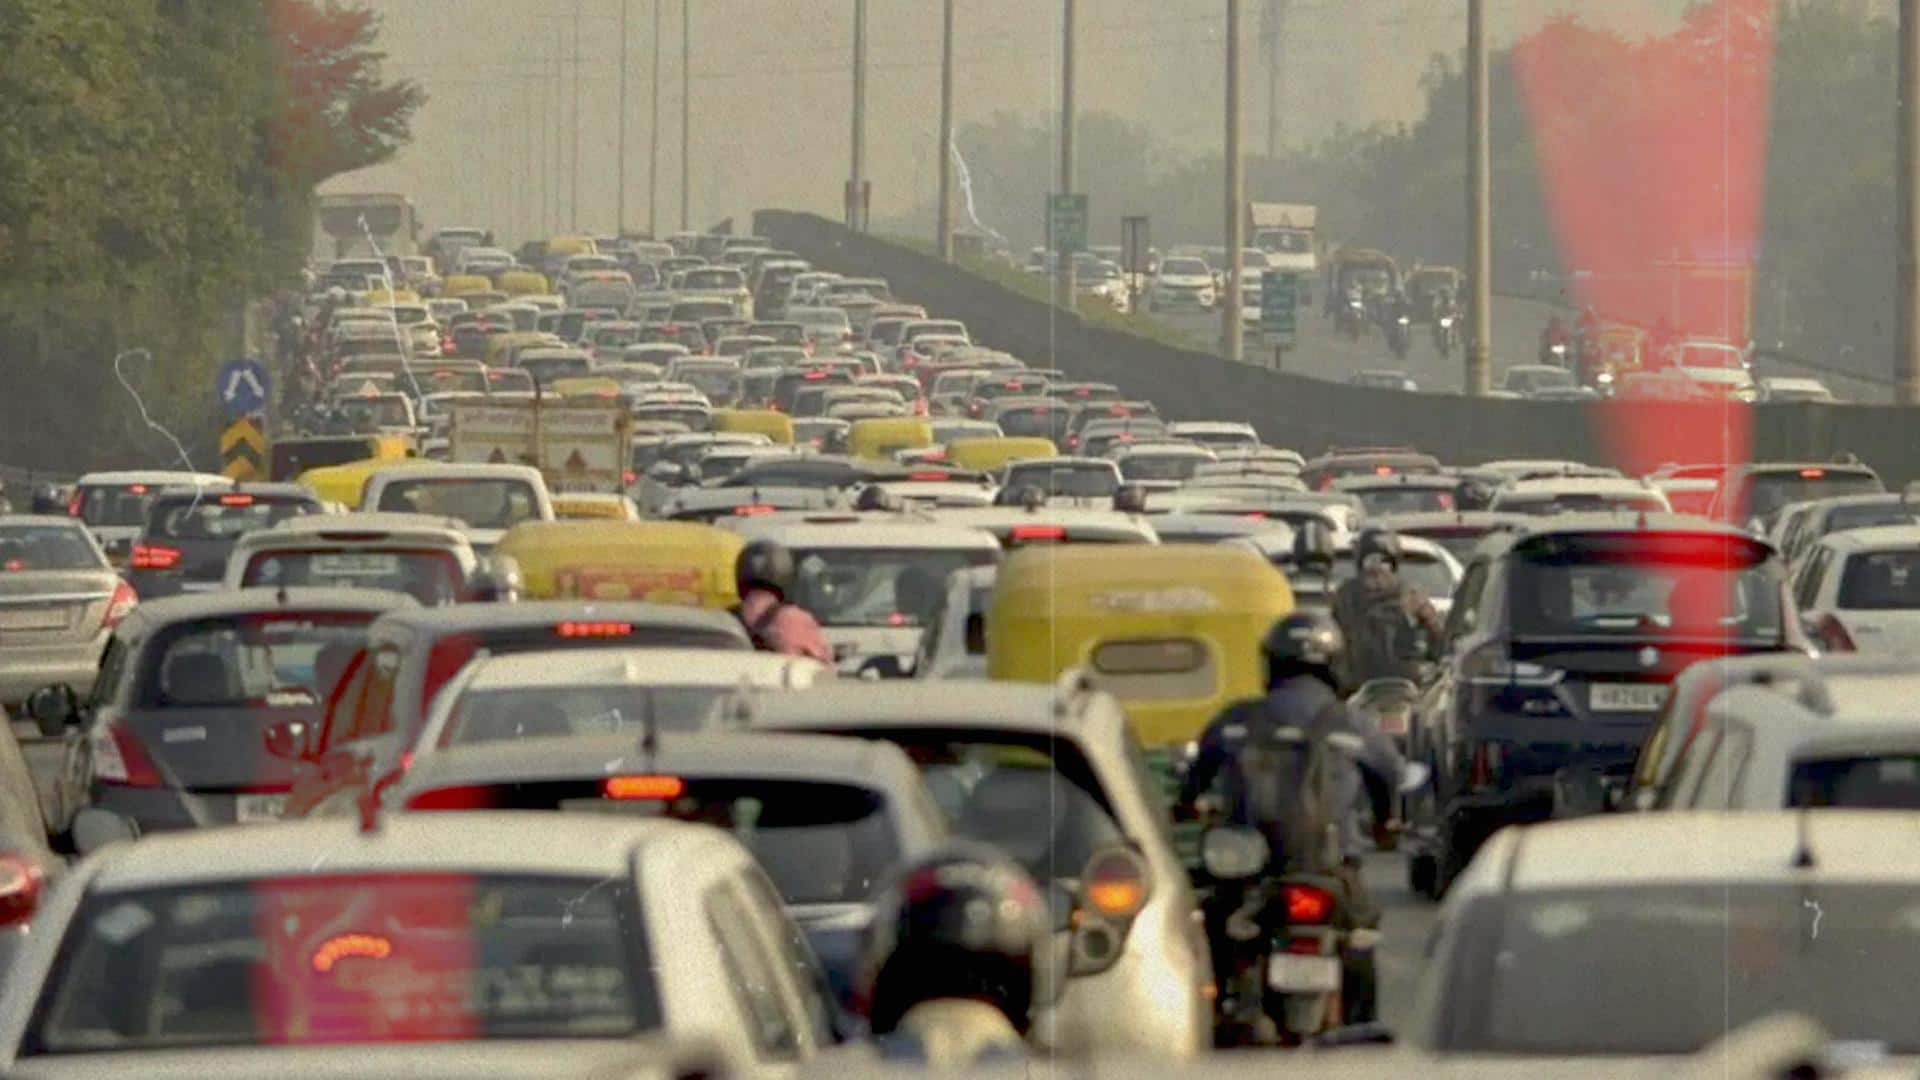 Delhi bans BS3 petrol and BS4 diesel cars: Here's why